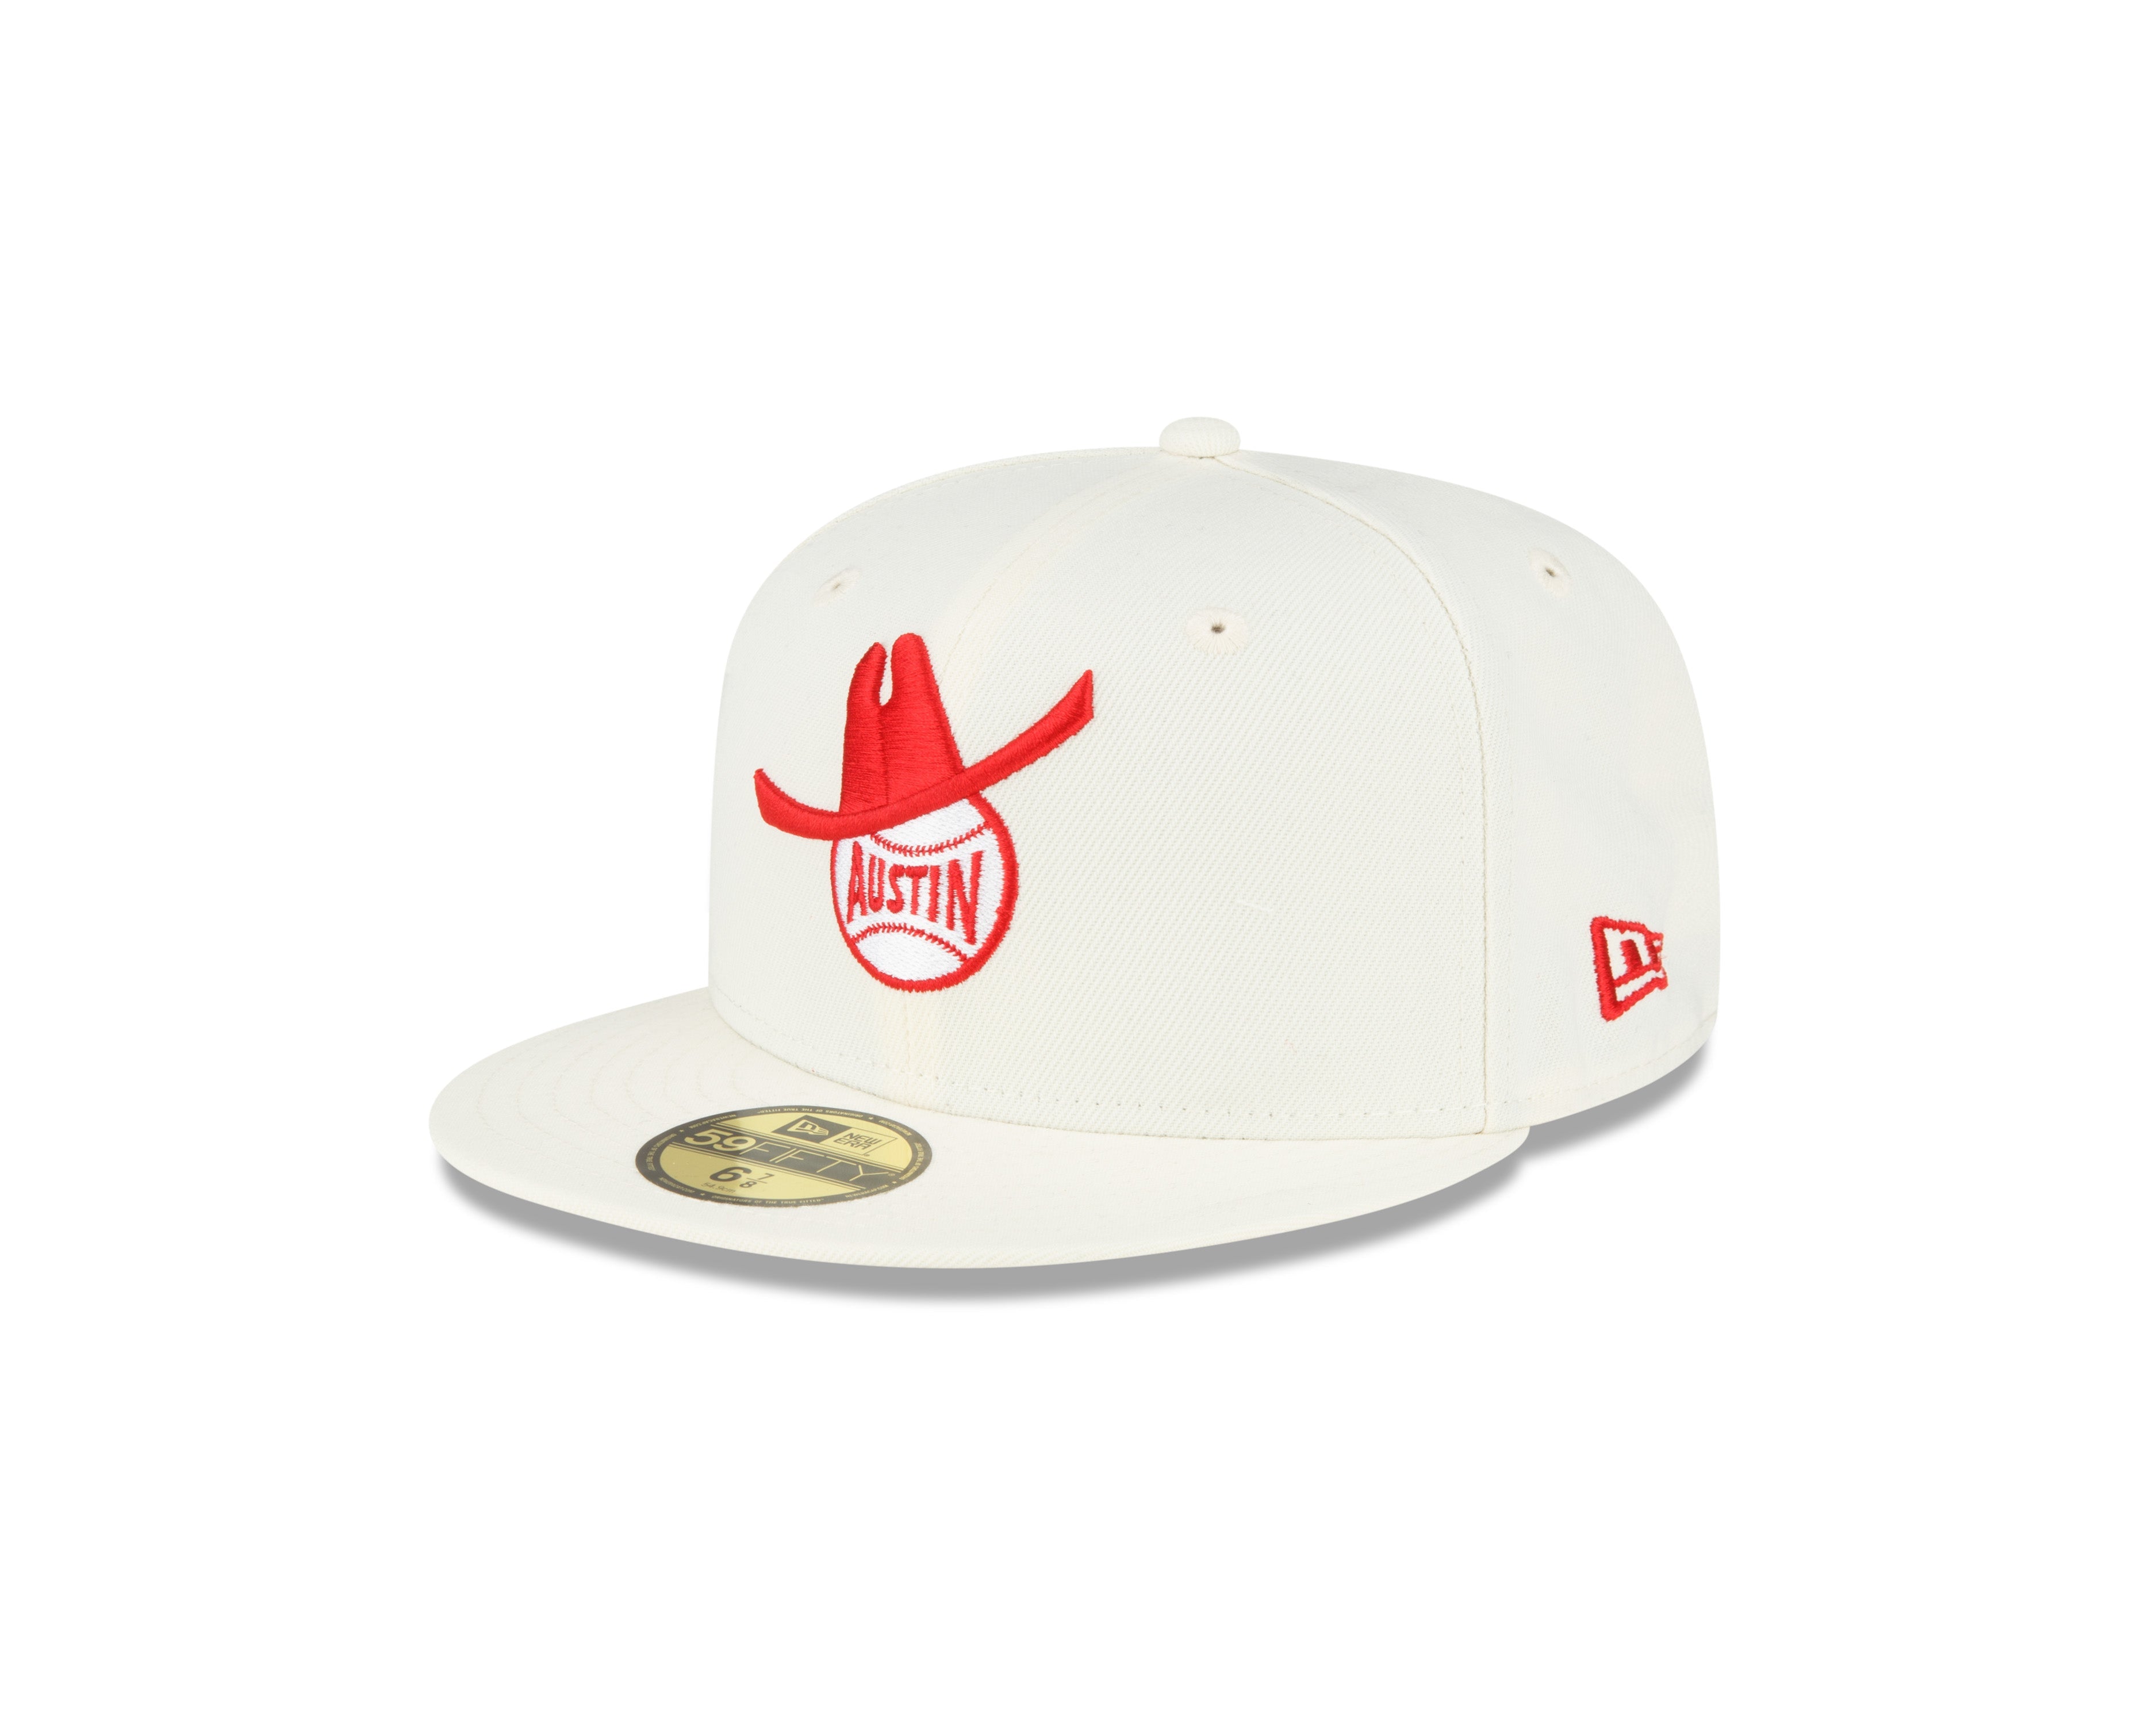 Reno Aces New Era Alternate Authentic Collection 59FIFTY Fitted Hat - White